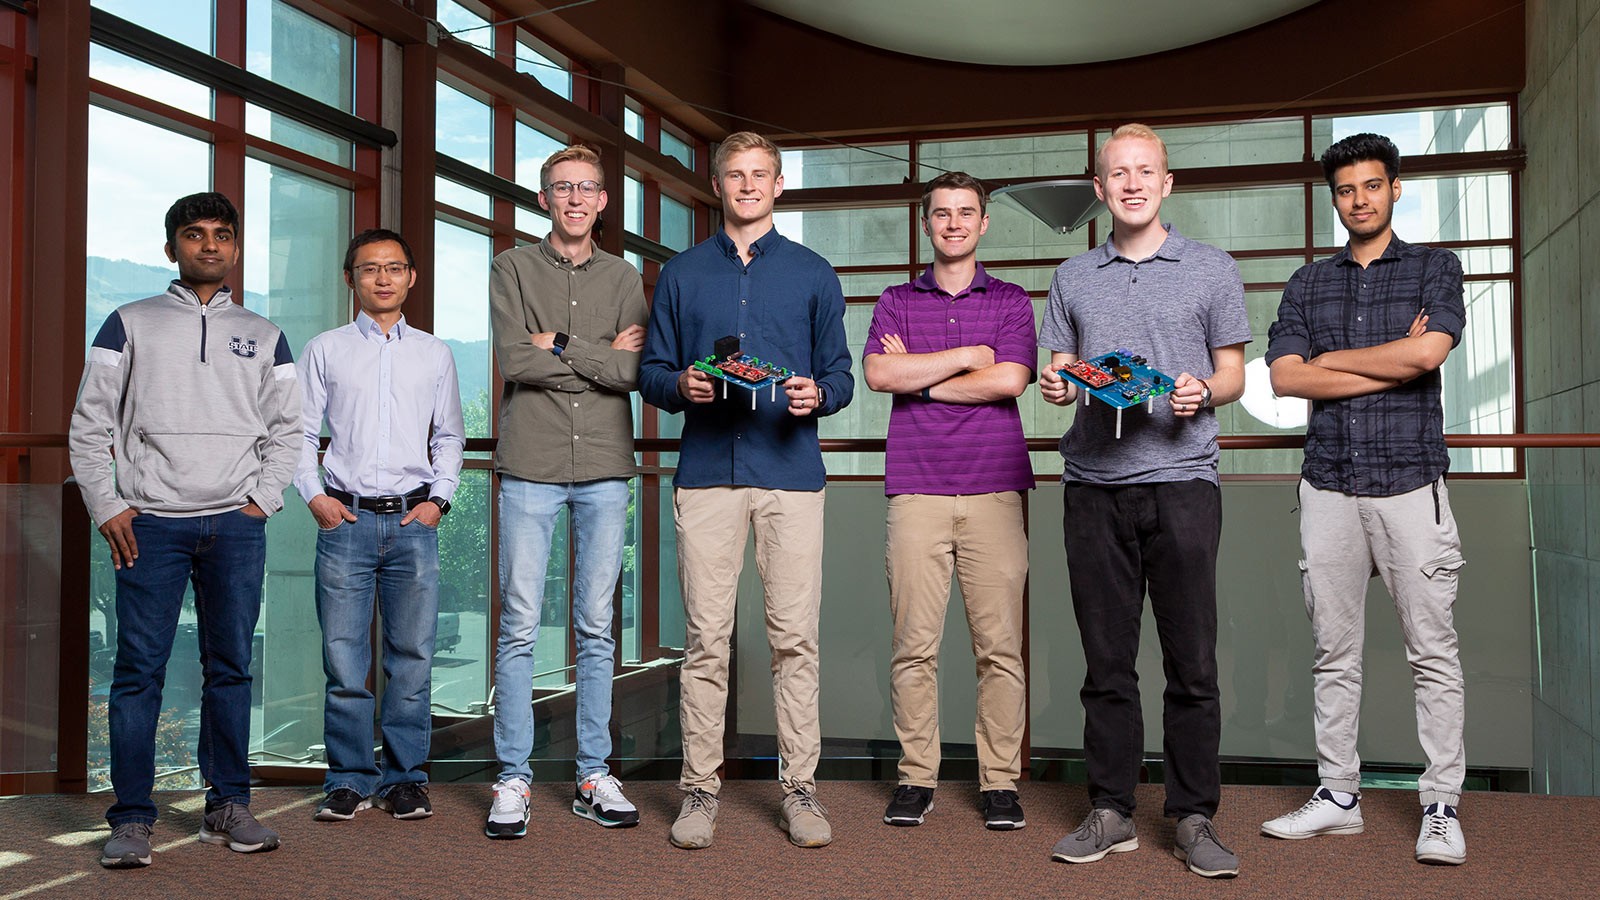 Seven engineering students pose for a picture. Two hold electrical devices.